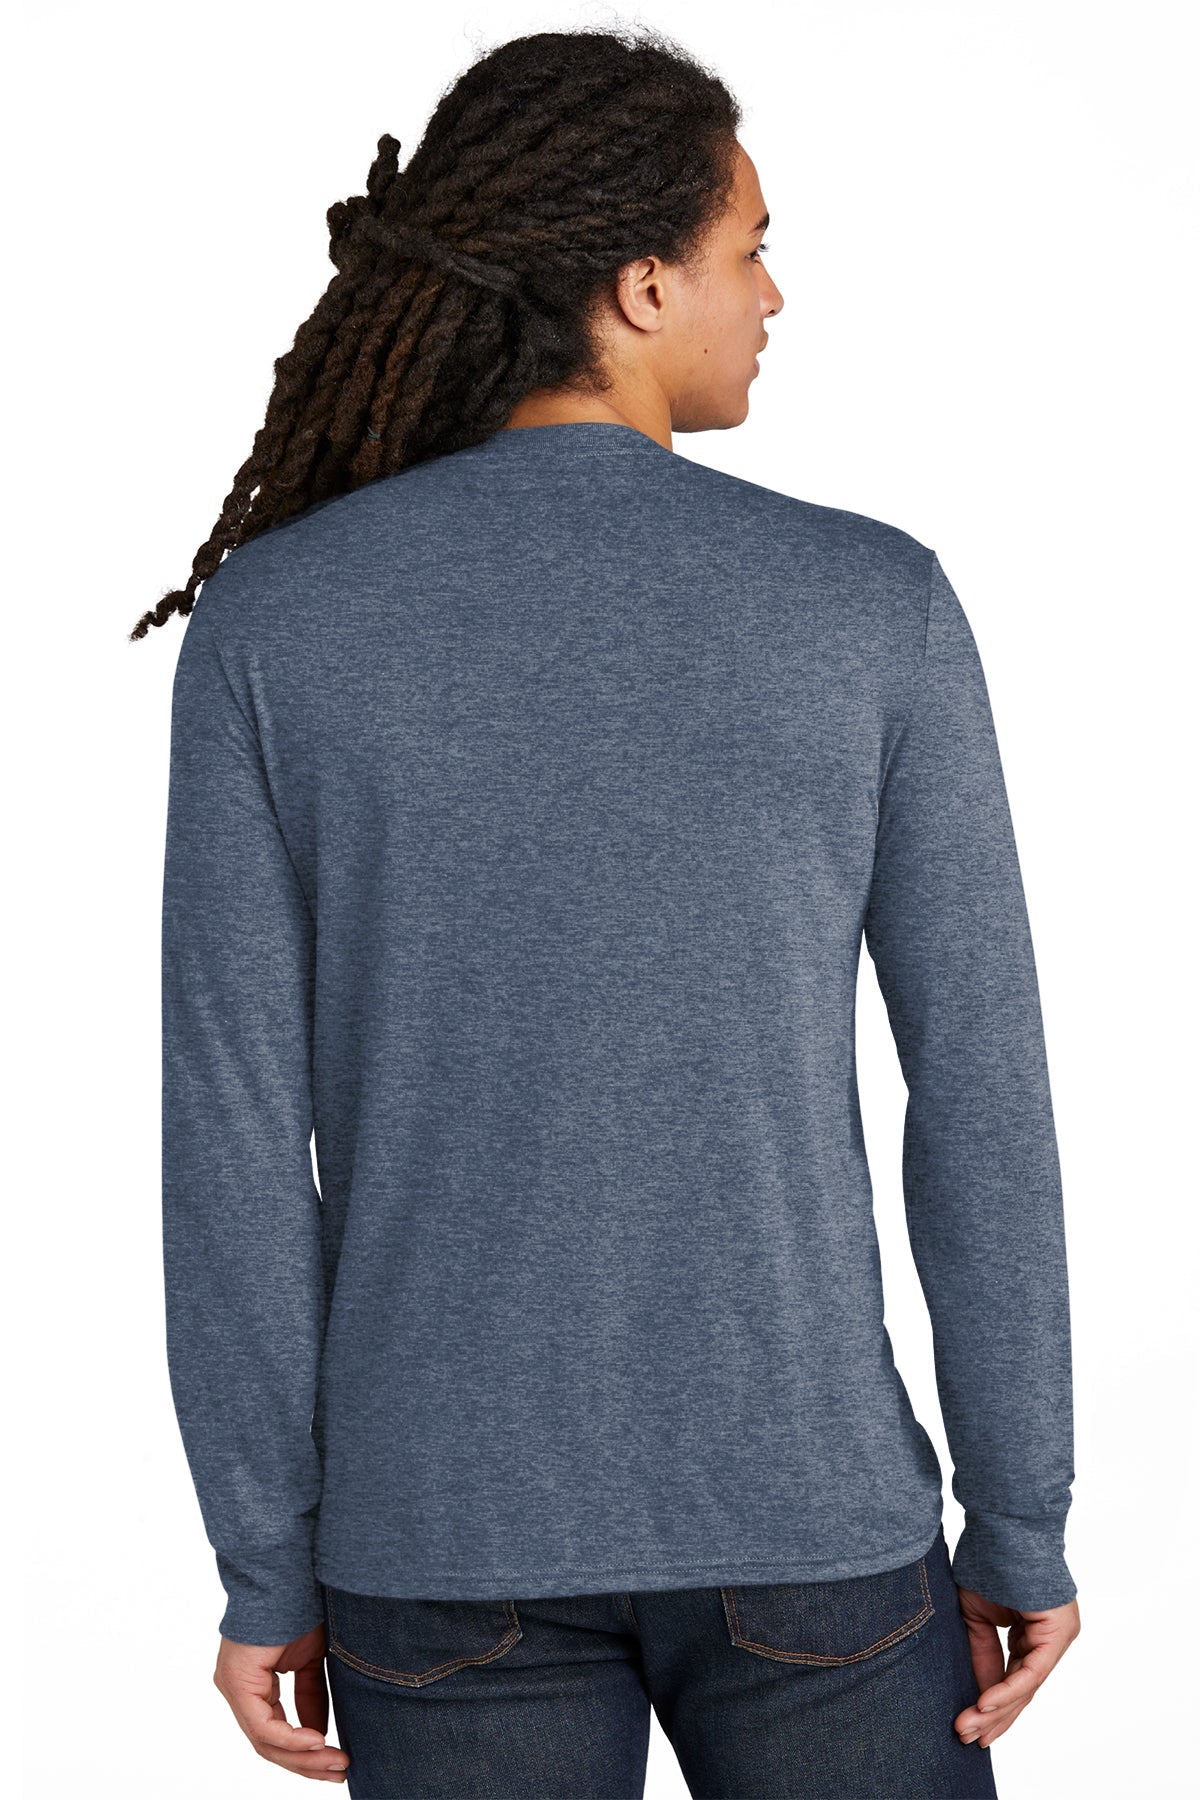 District Made Mens Perfect Tri Long Sleeve Crew Tee